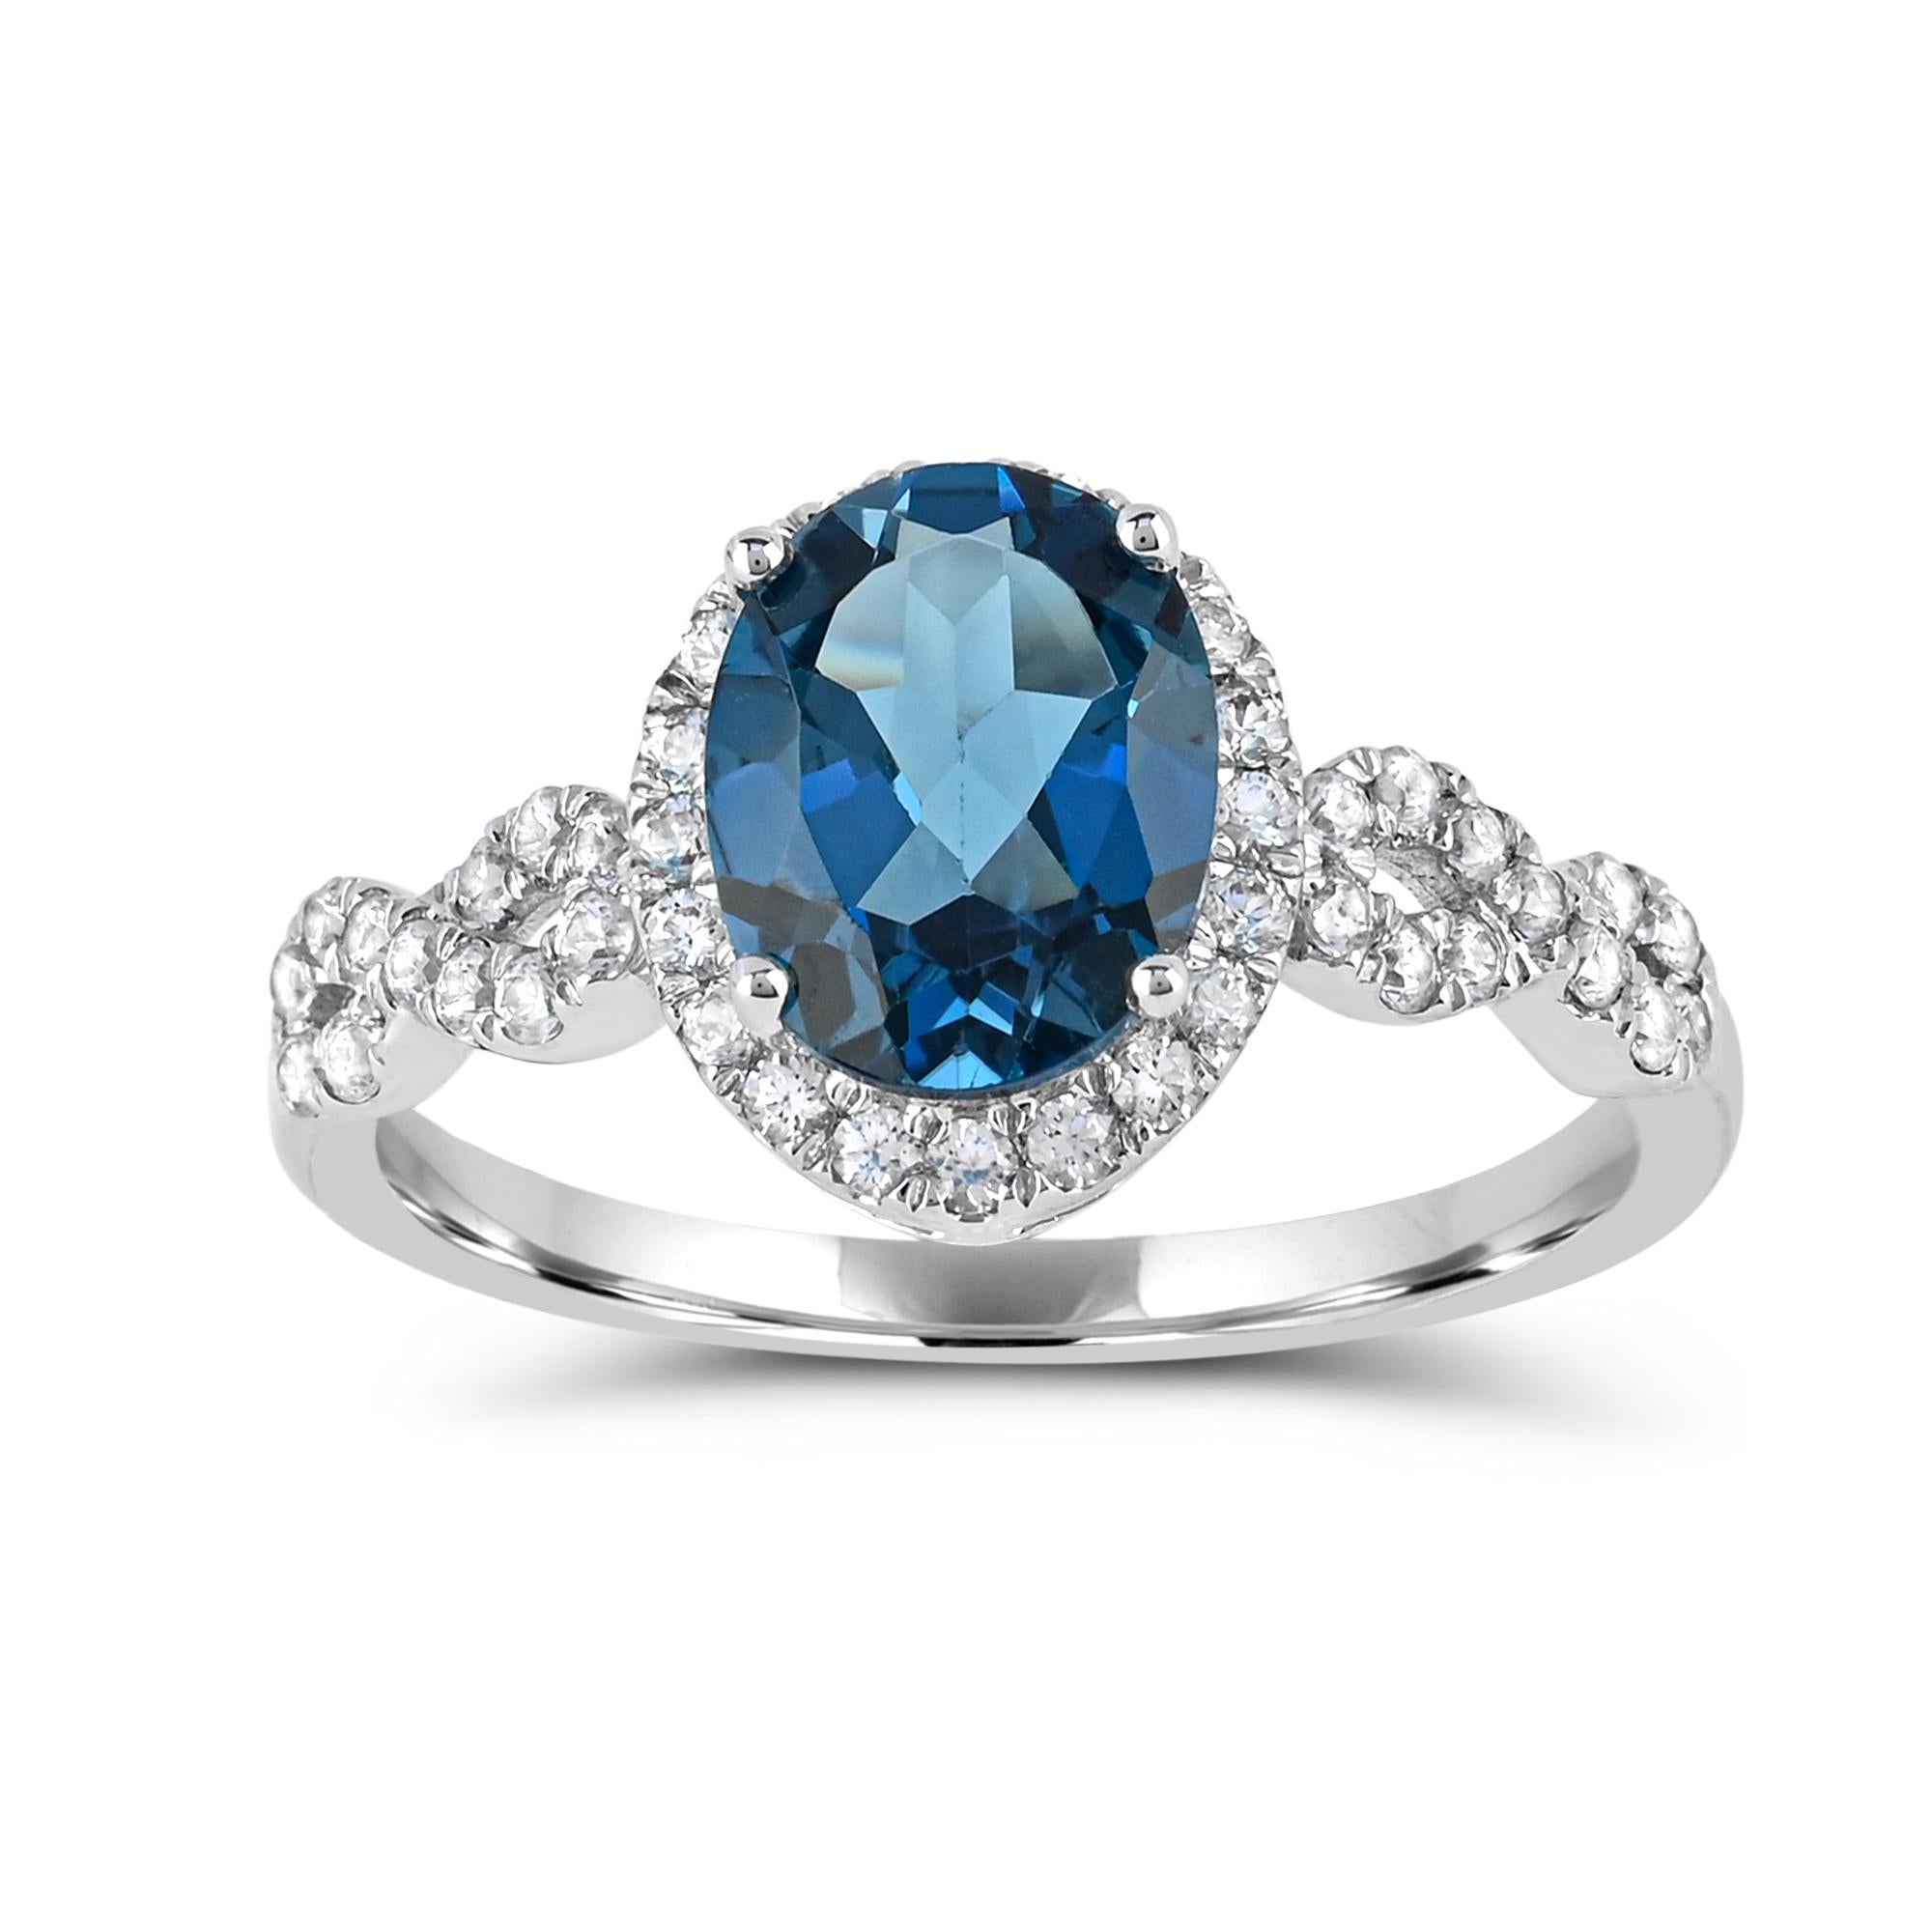 With this blissful blue, this infinity ring looks so amazing. This ring features 9x7 mm Oval shape London Blue topaz with White Zircon accents set in 10K White Gold.  This ring is size 7.0.

For jewelry care, gently clean by rinsing in warm water